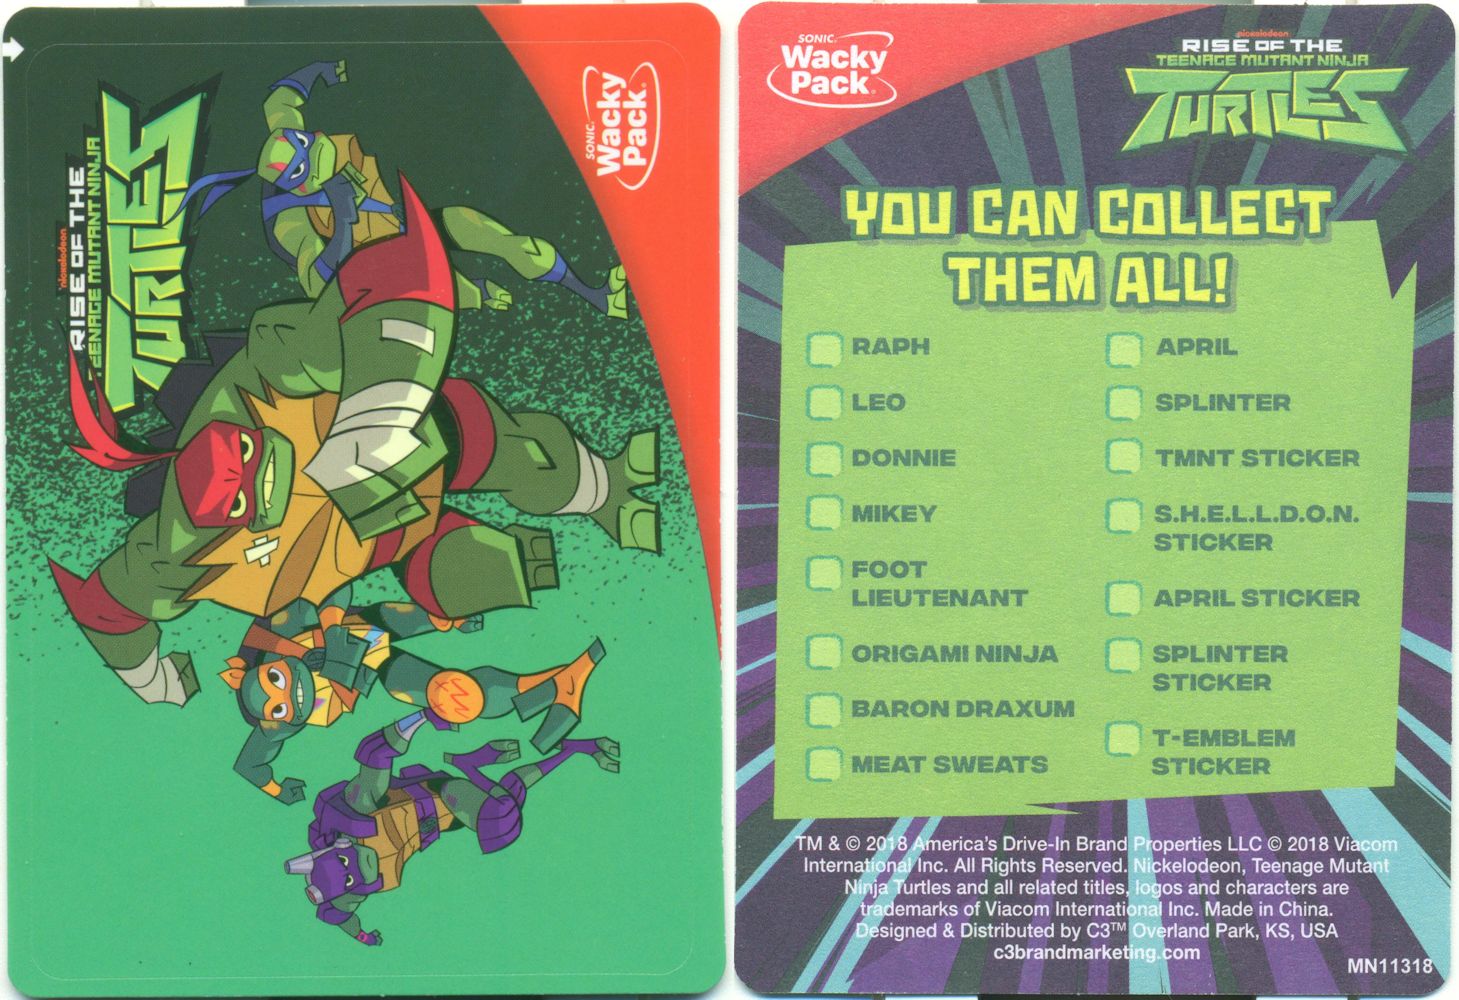 TMNT Sticker front and back